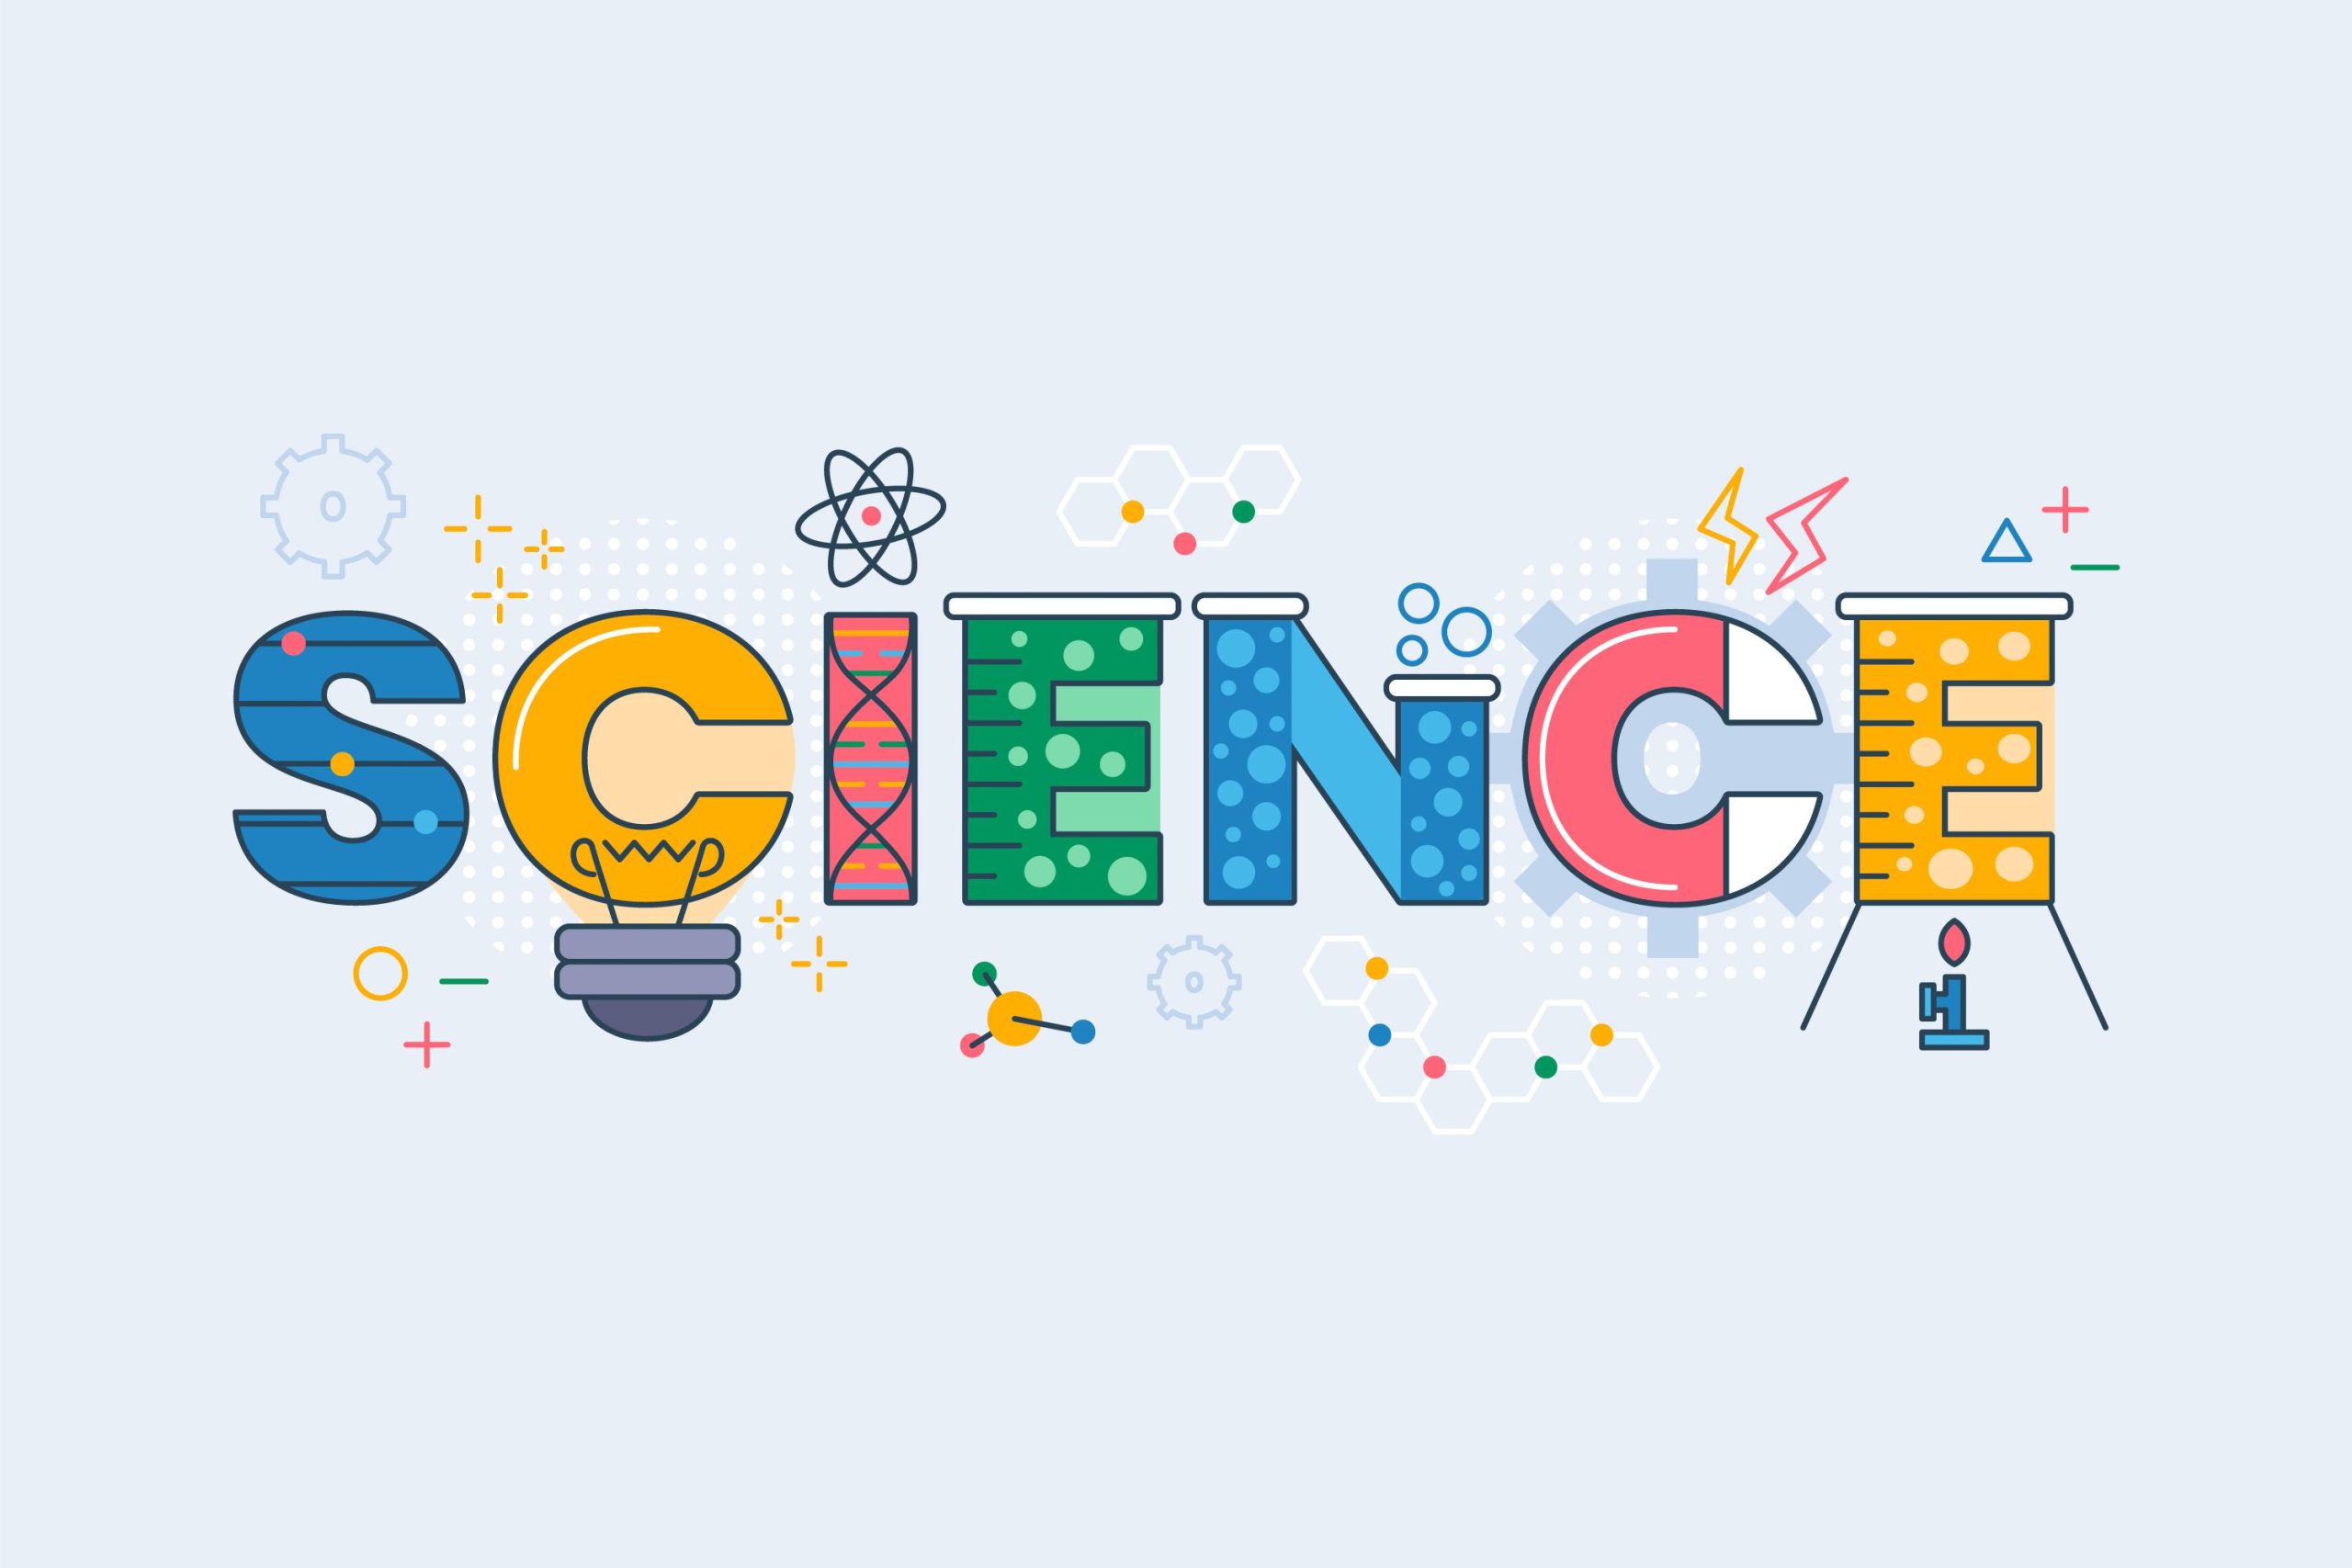 "Science" written with colourful letters